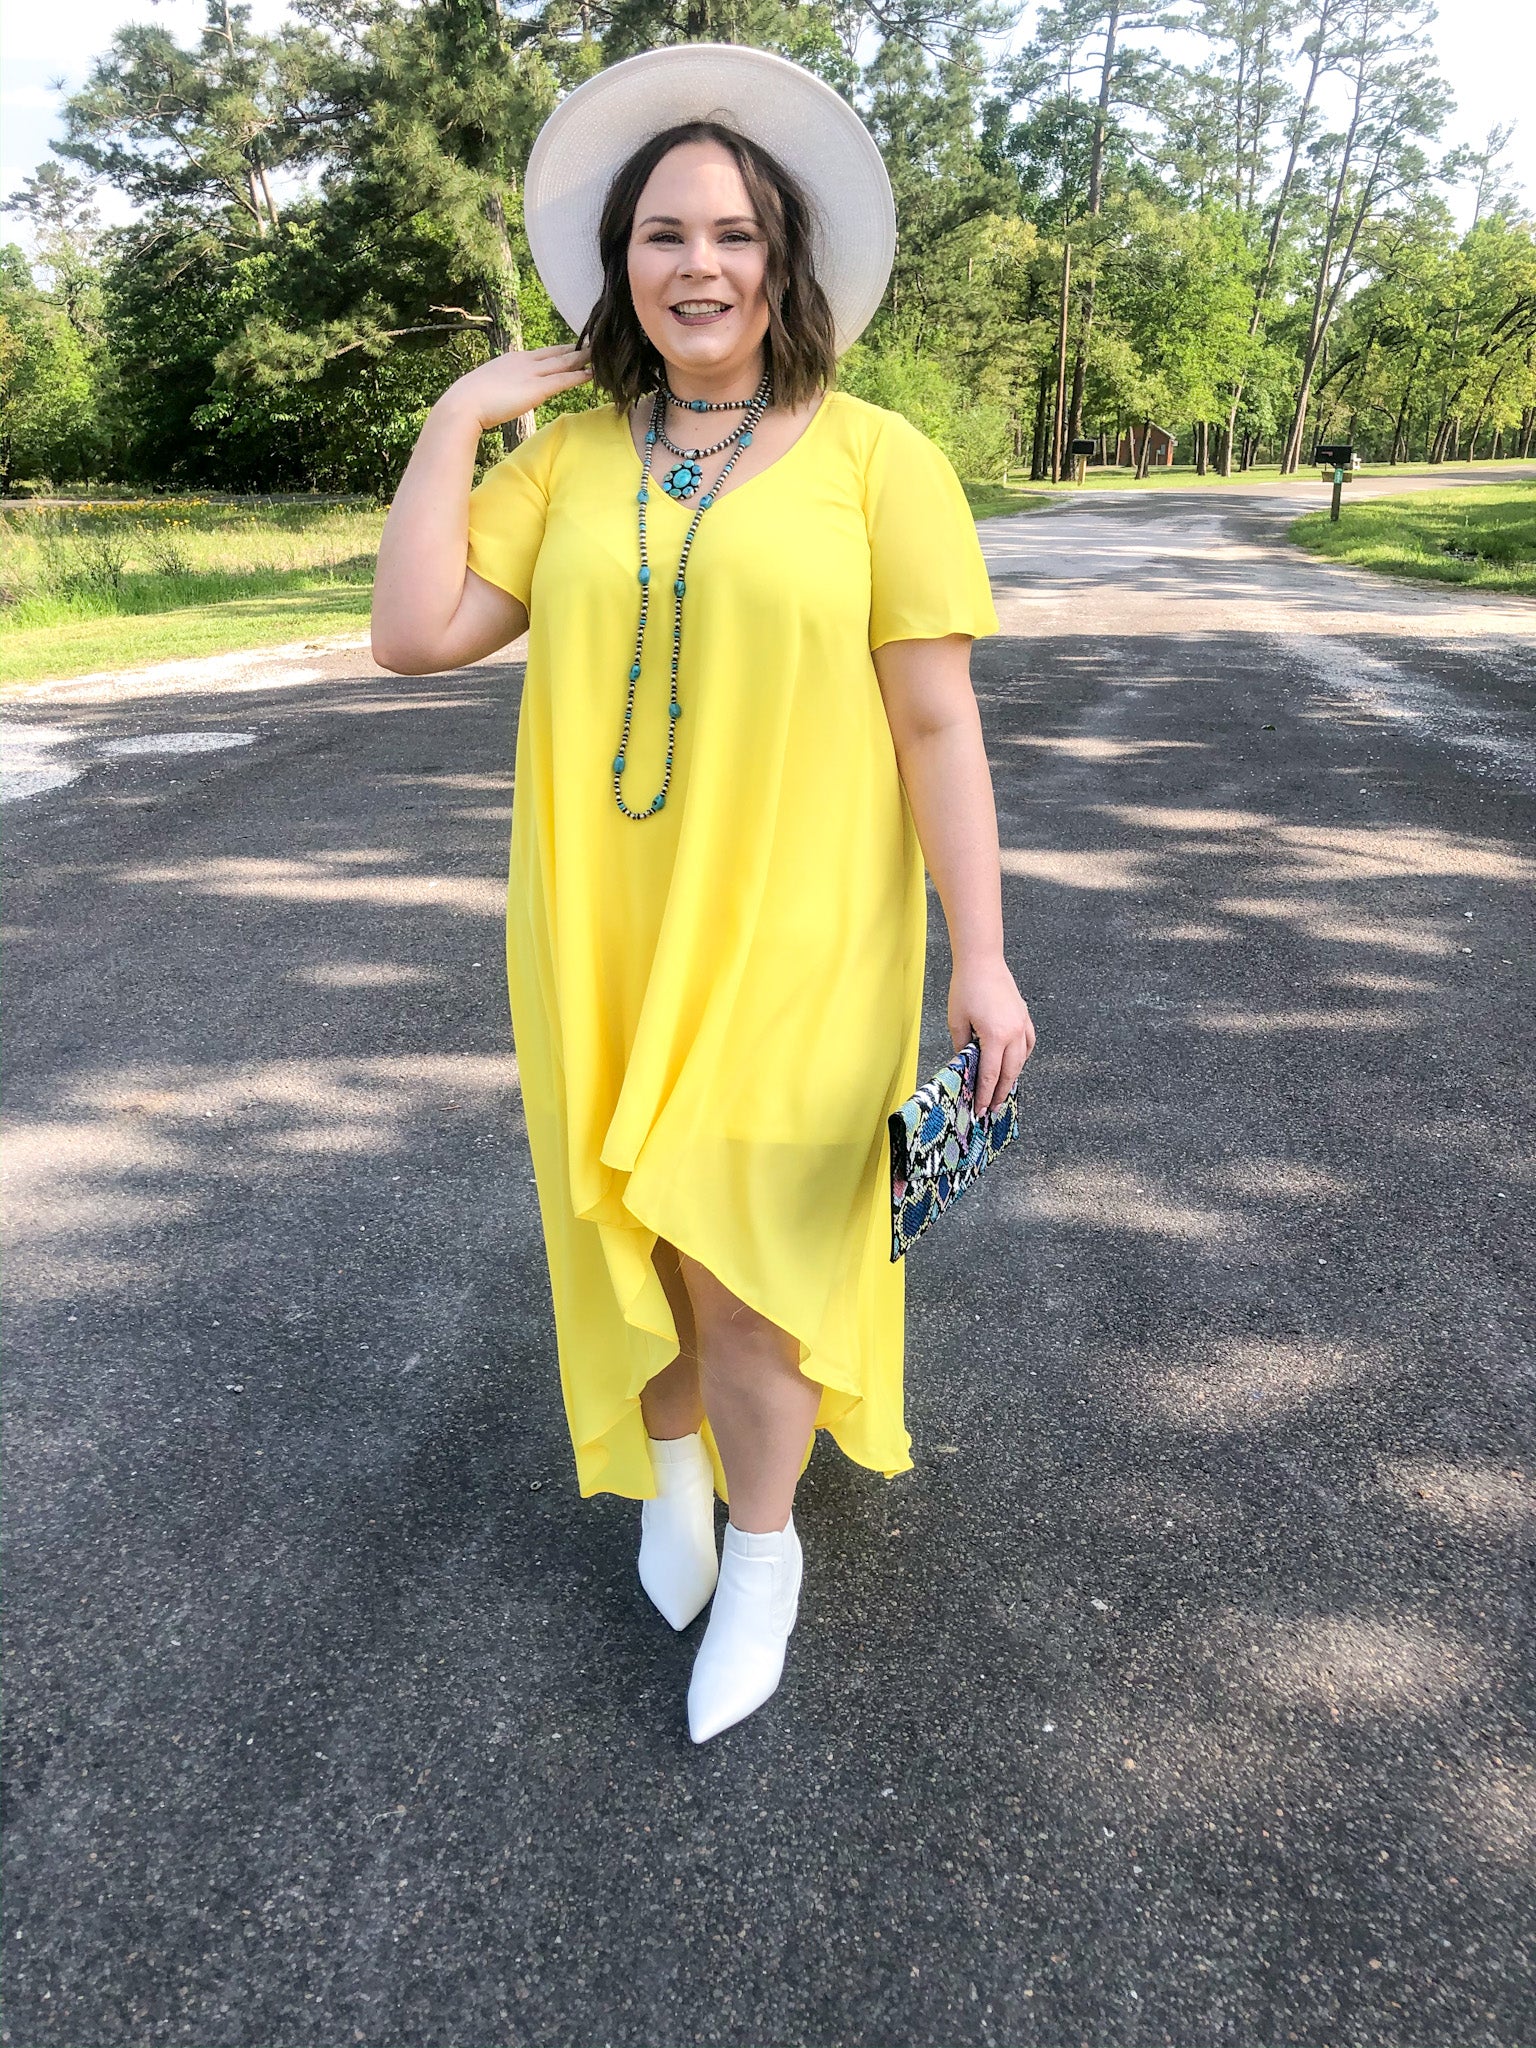 Last Chance Size Small & Med. | Girl On Fire Short Sleeve High-Low Dress with V-Neck in Lemon Yellow - Giddy Up Glamour Boutique